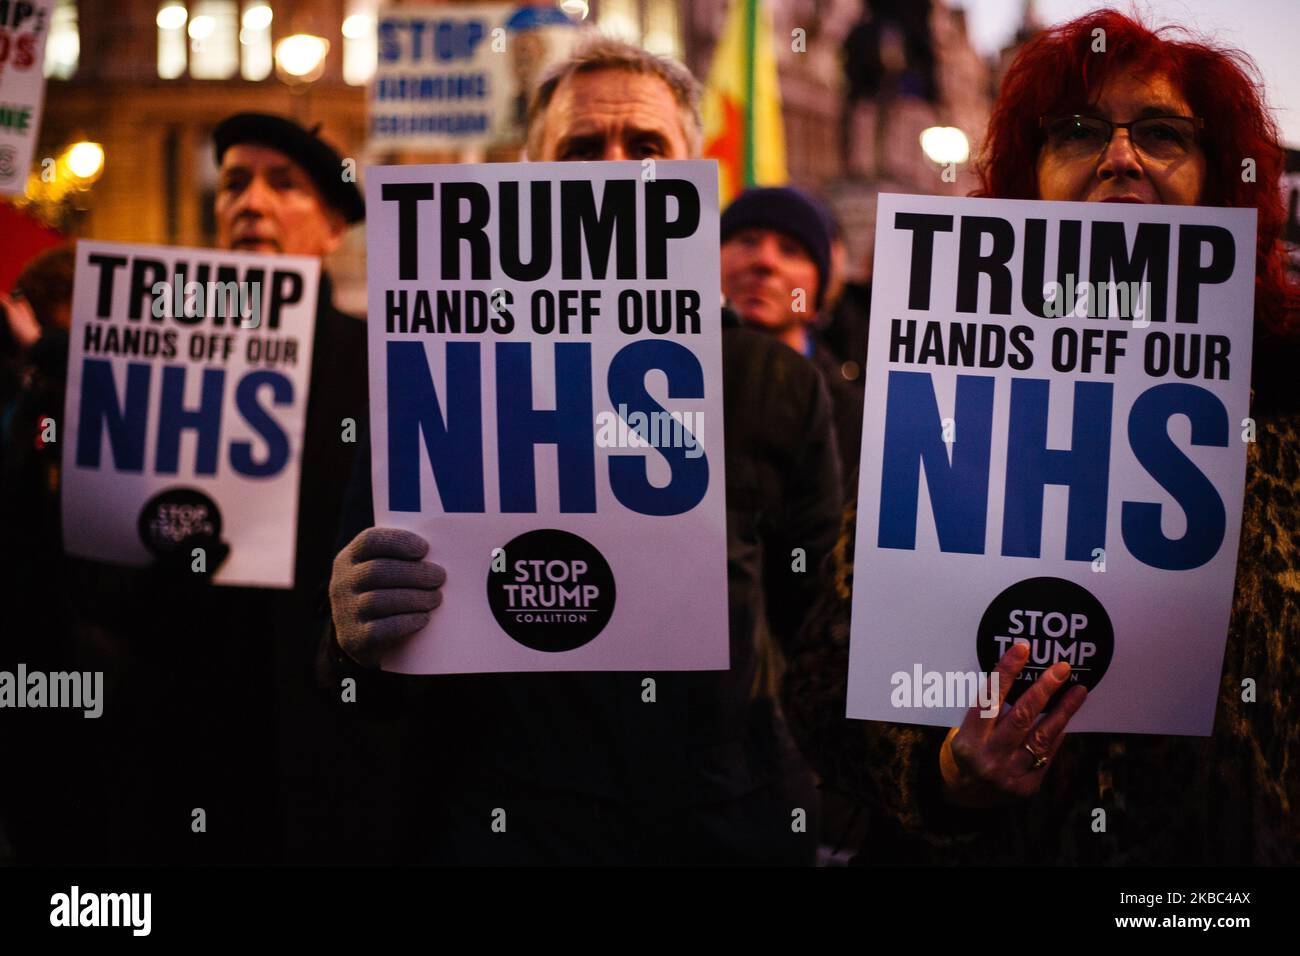 Activists carry placards opposing any post-Brexit US market access to Britain's National Health Service (NHS) at a protest against US President Donald Trump in Trafalgar Square in London, England, on December 3, 2019. President Trump arrived in the UK on a three-day visit last night, chiefly to attend tomorrow's NATO summit in Watford. He is tonight attending a reception for NATO leaders with Queen Elizabeth at Buckingham Palace. Trump today stated that he wanted 'absolutely nothing' to do with the NHS when asked if it would form part of any post-Brexit trade talks. (Photo by David Cliff/NurPh Stock Photo